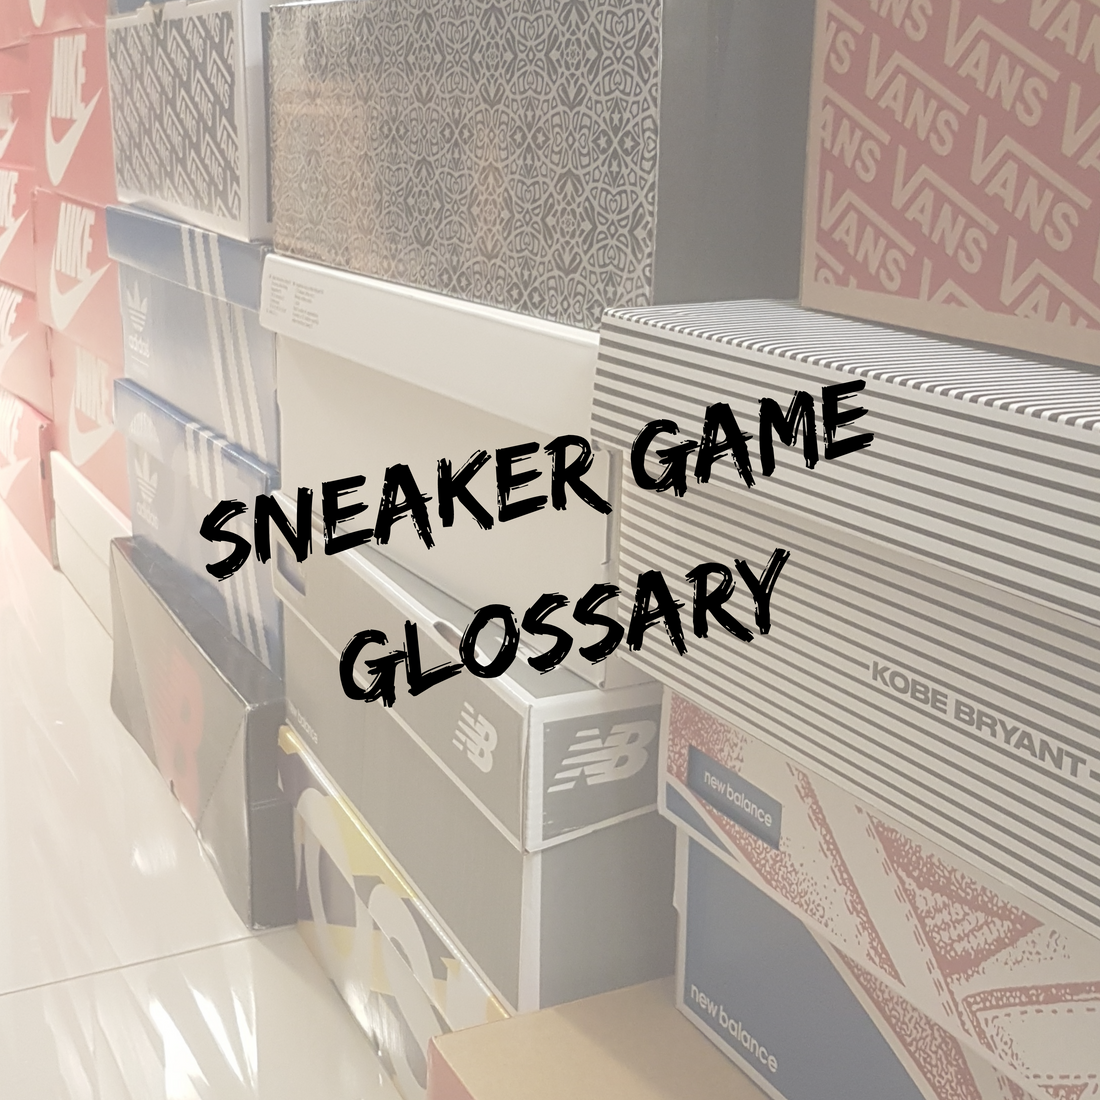 Sneaker Game Glossary